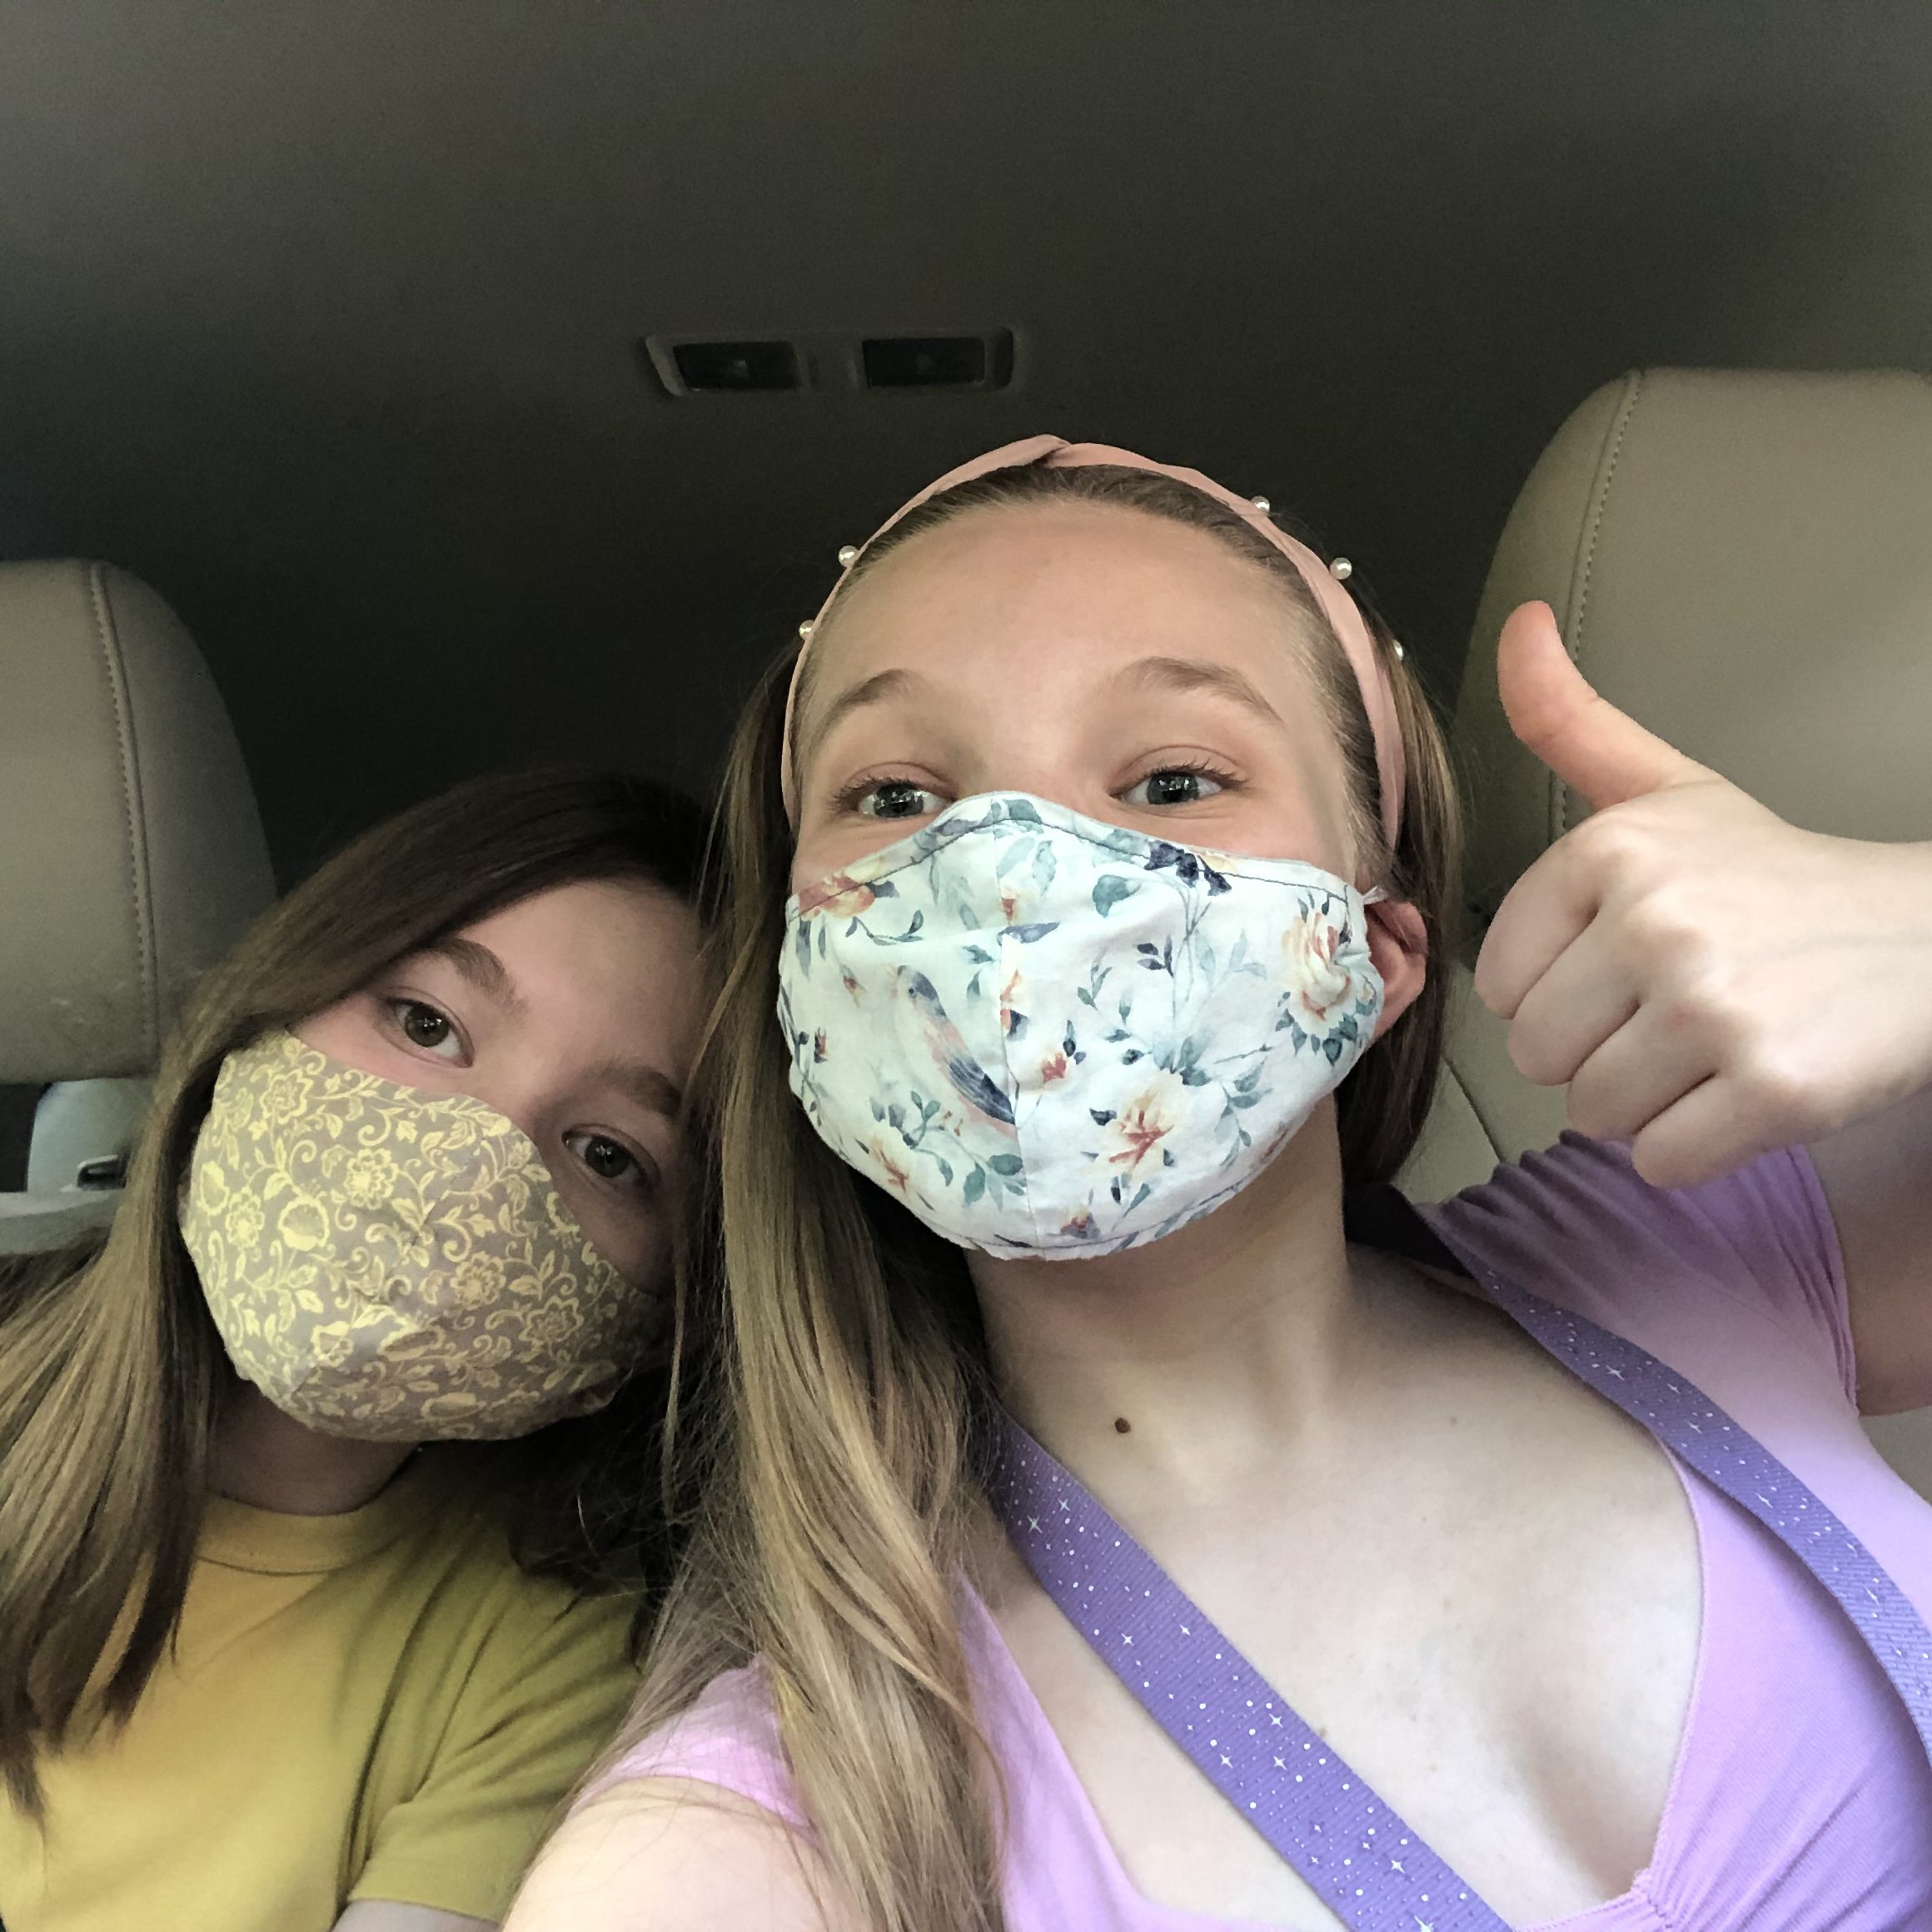 A selfie of me and my little sister, Tess waiting in the line at the Dunkin Donuts drive thru. We are wearing masks and had wipes in the car to disinfect our drinks.